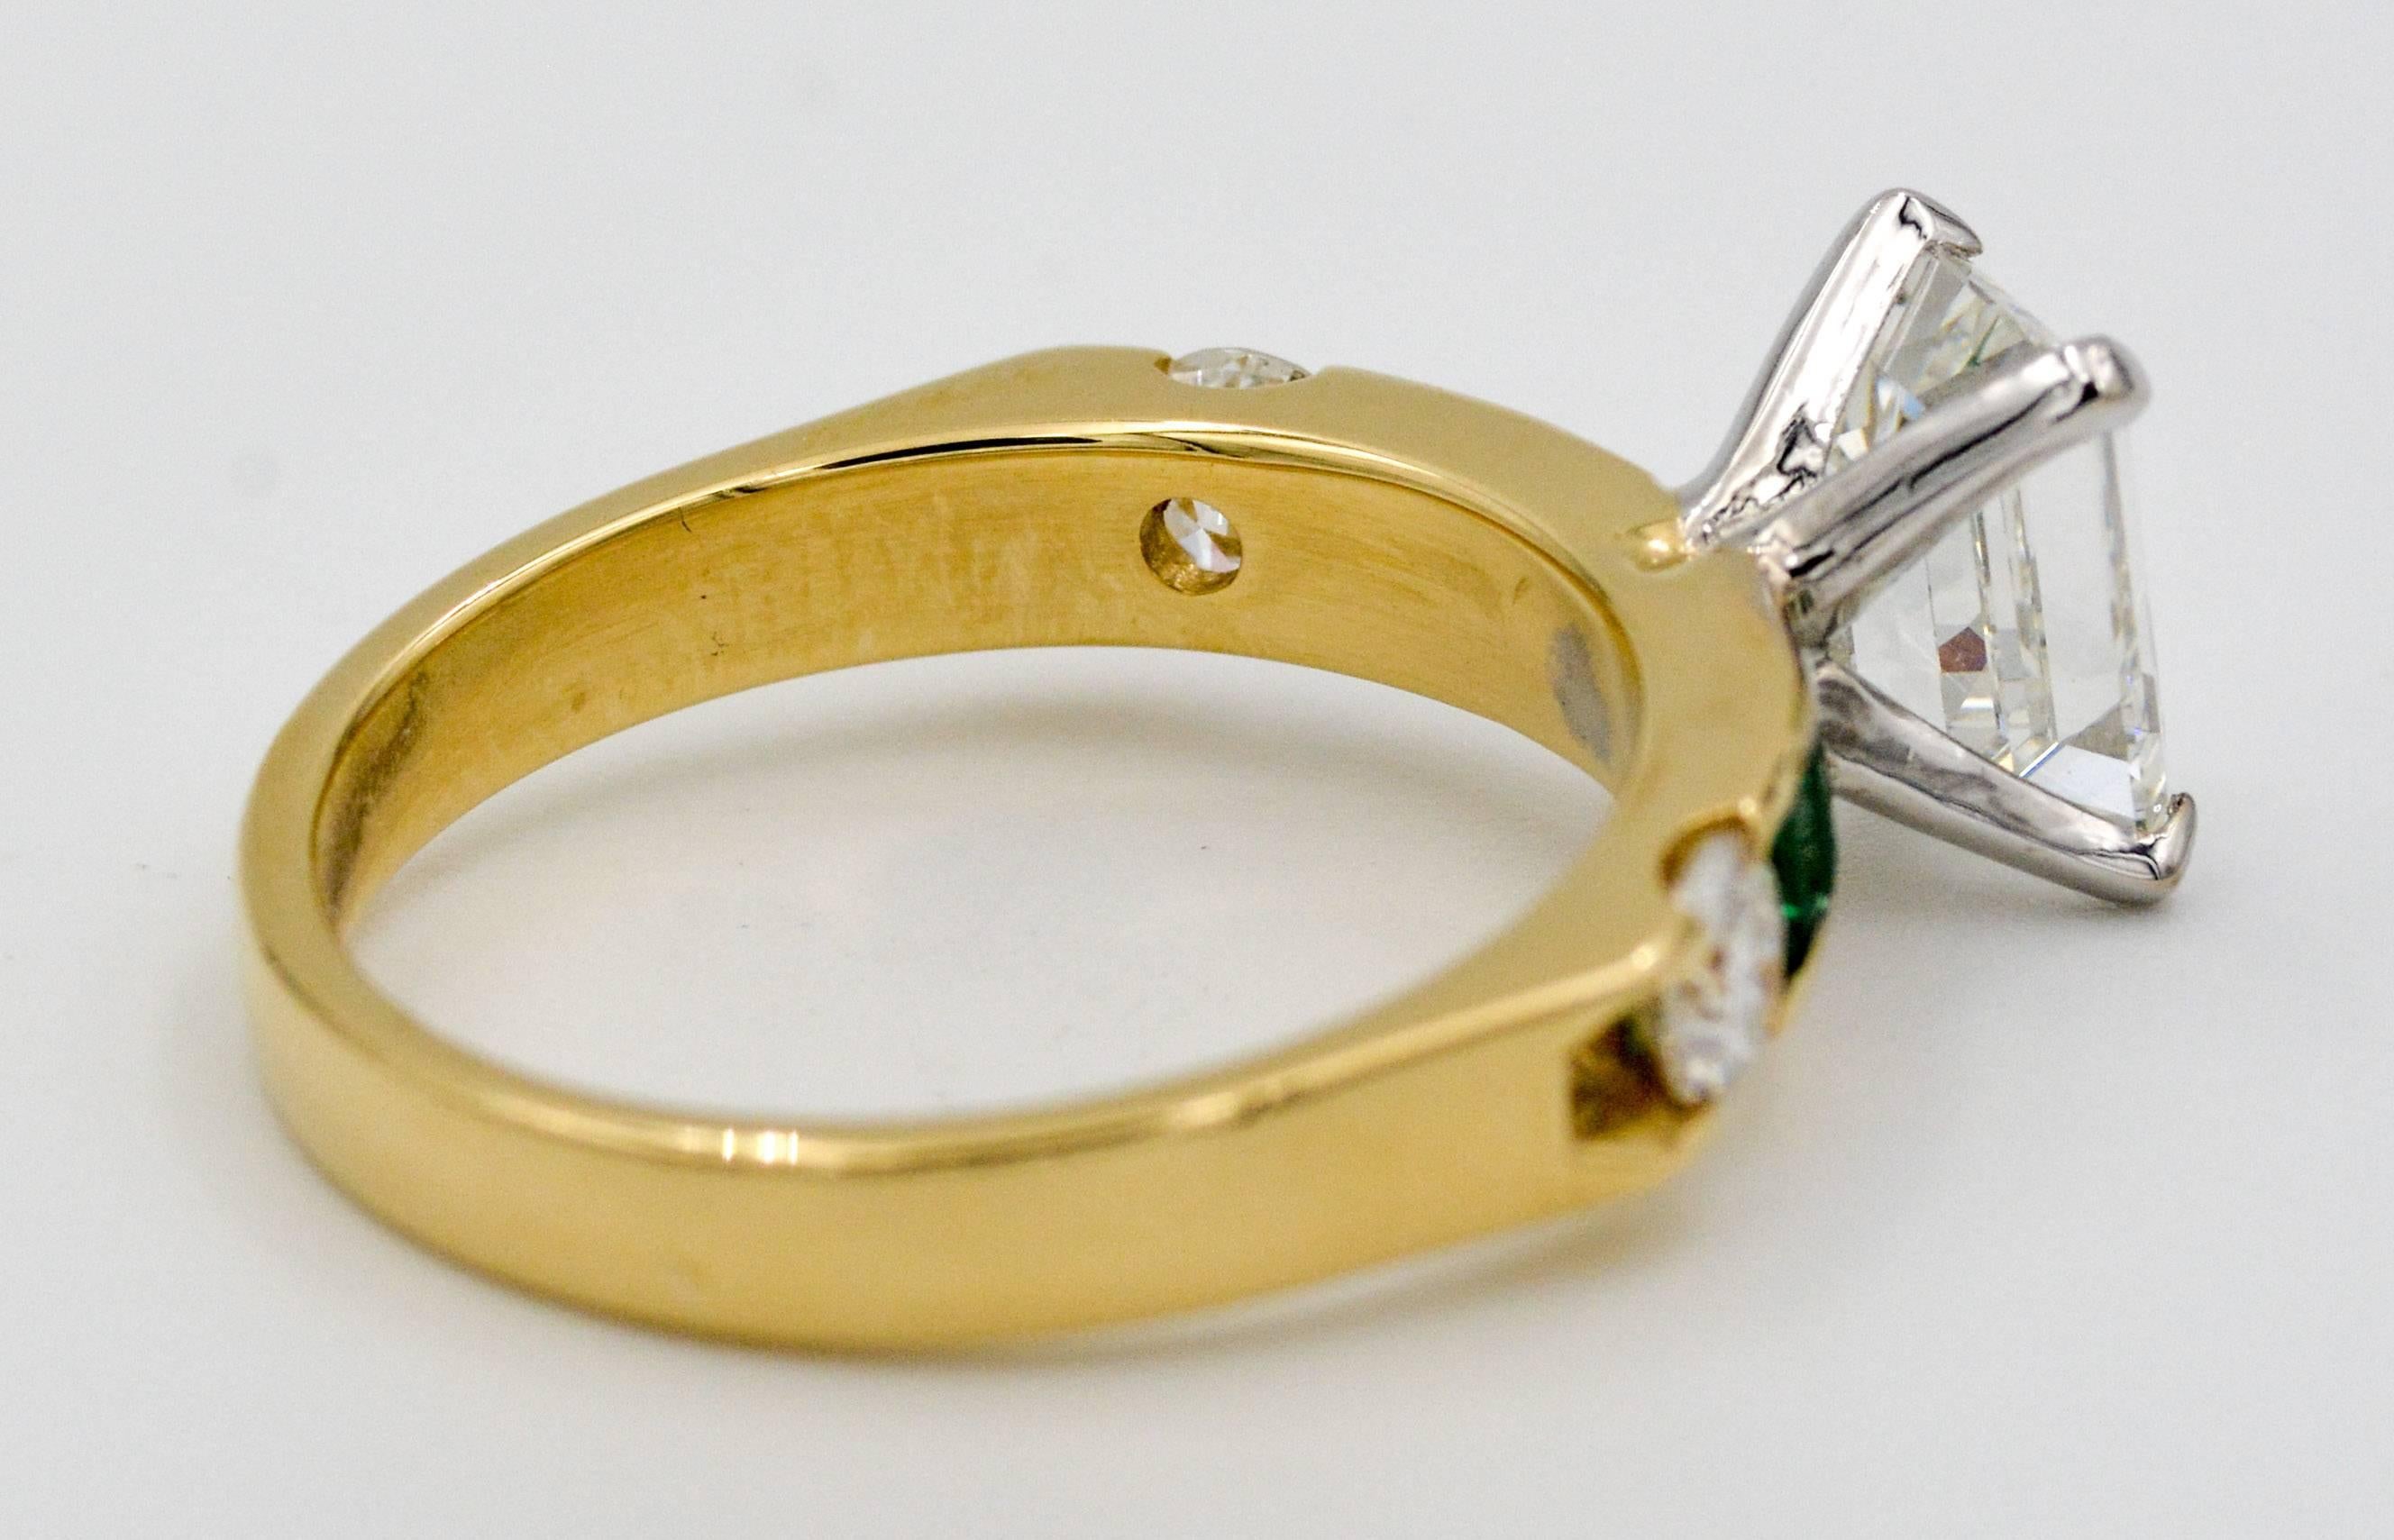 The dynamic simplicity of an emerald cut diamond surrounded by emeralds creates an engagement ring like none other. This 18kt yellow gold ring features a stunning 1.33 ct emerald cut diamond (J color and VS2 clarity), in a setting that tapers to a